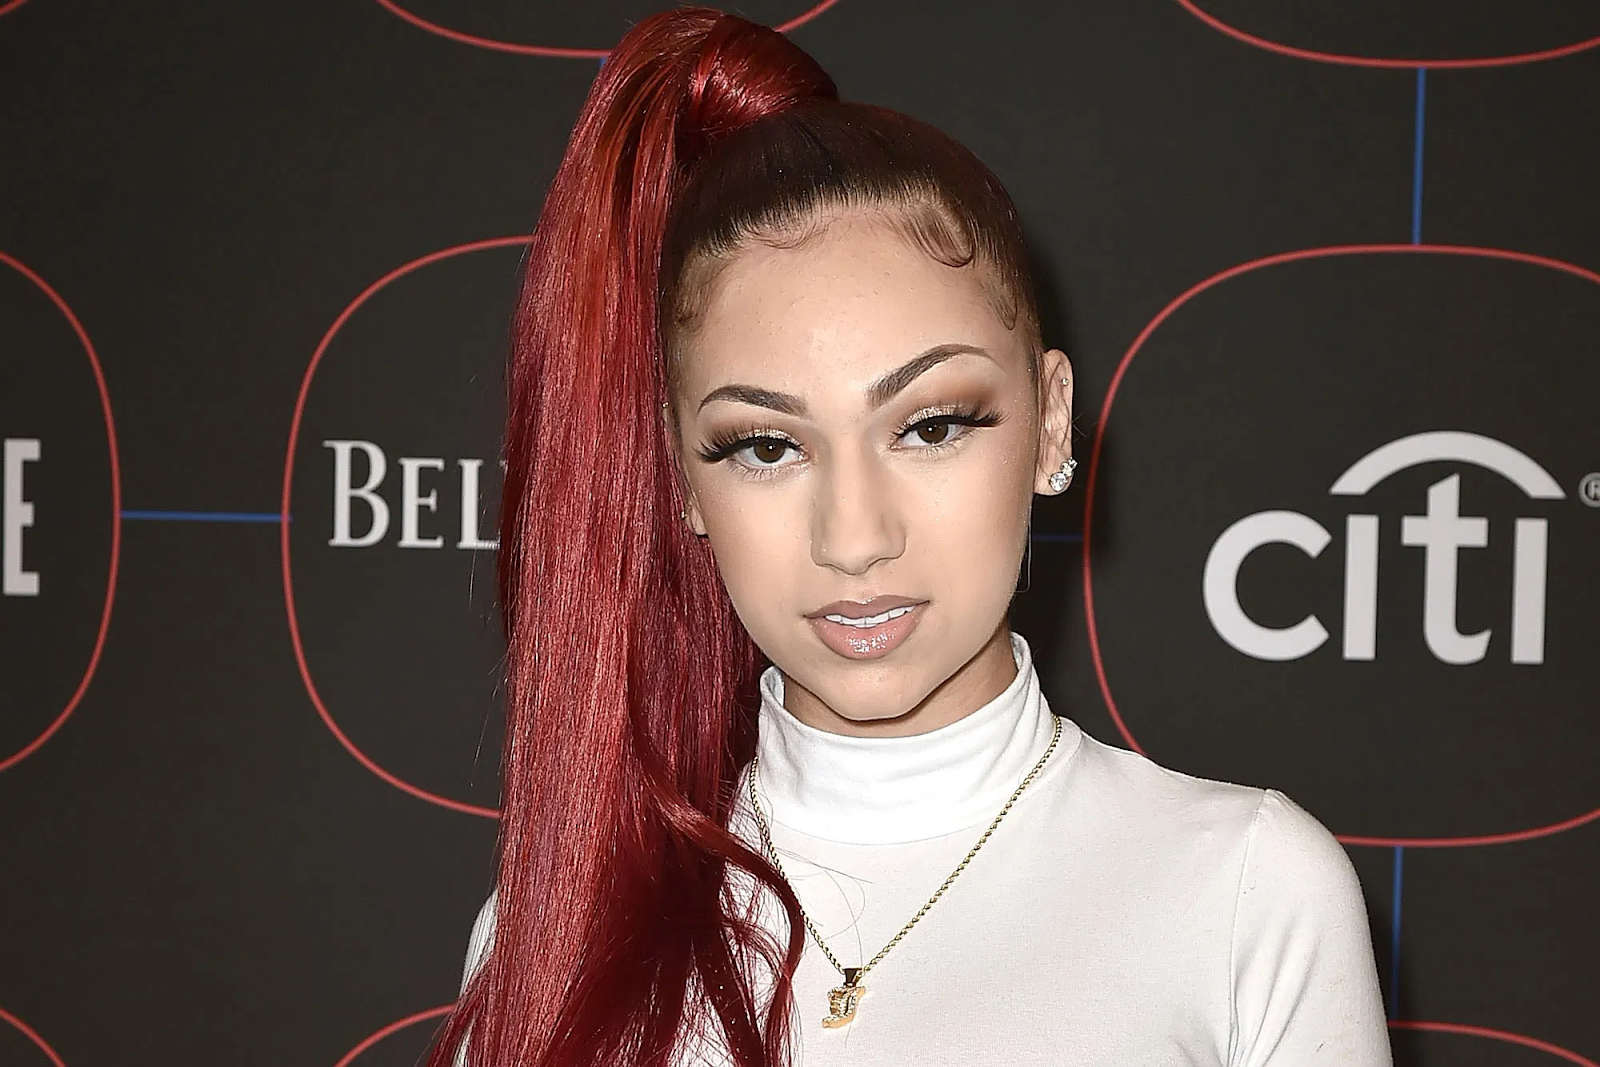 Danielle Bregoli now has become a famous singer under the name Bhad Bhabie 